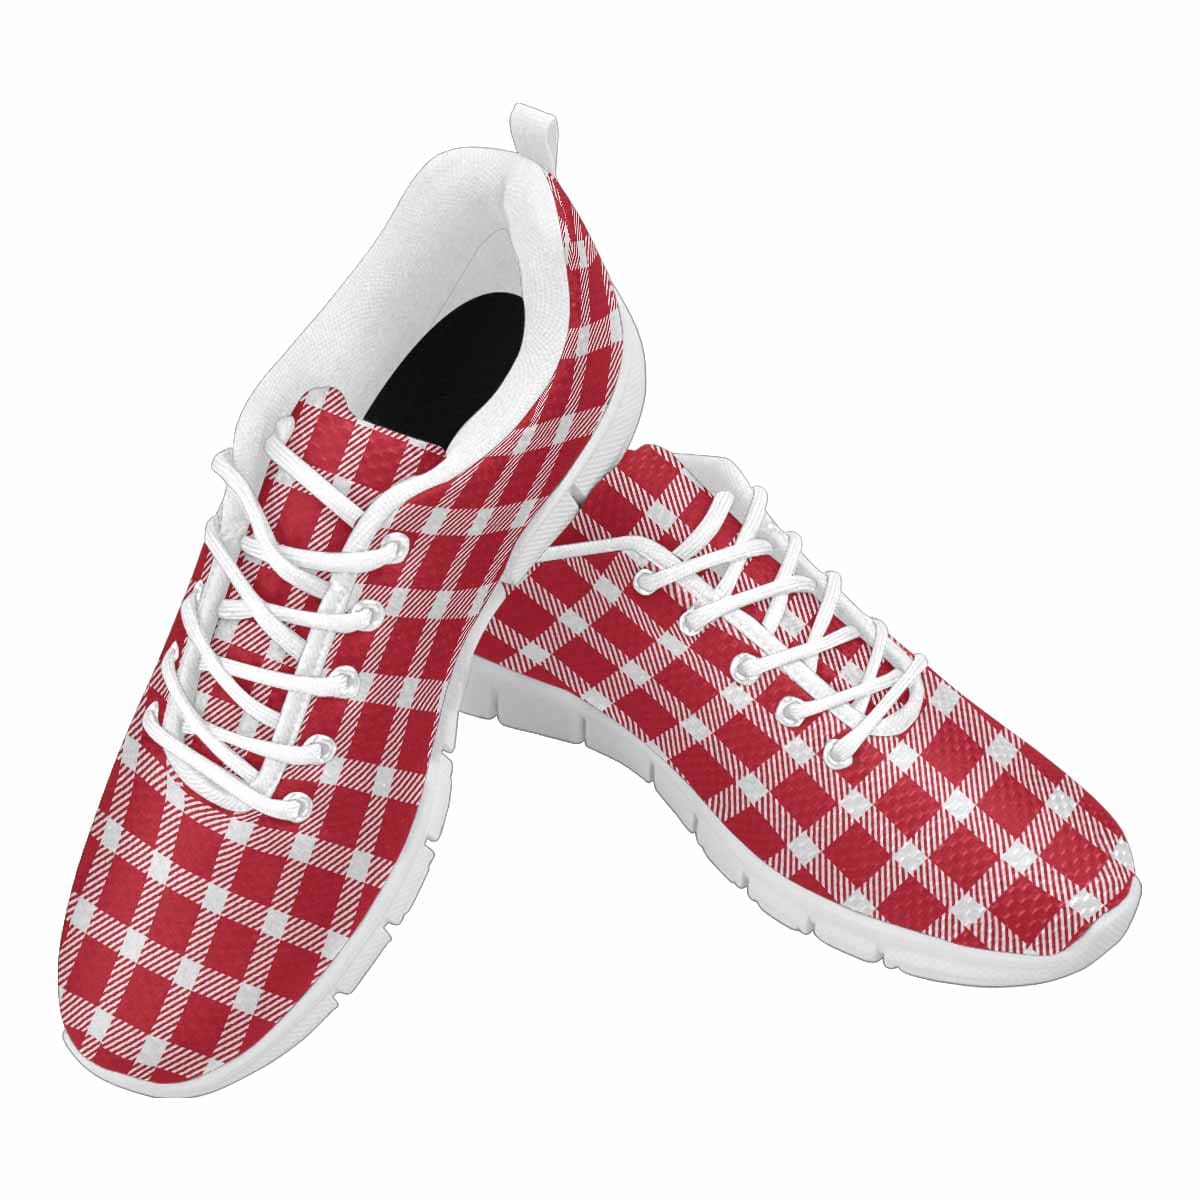 Sneakers For Men Buffalo Plaid Red And White - Running Shoes Dg857 - Mens